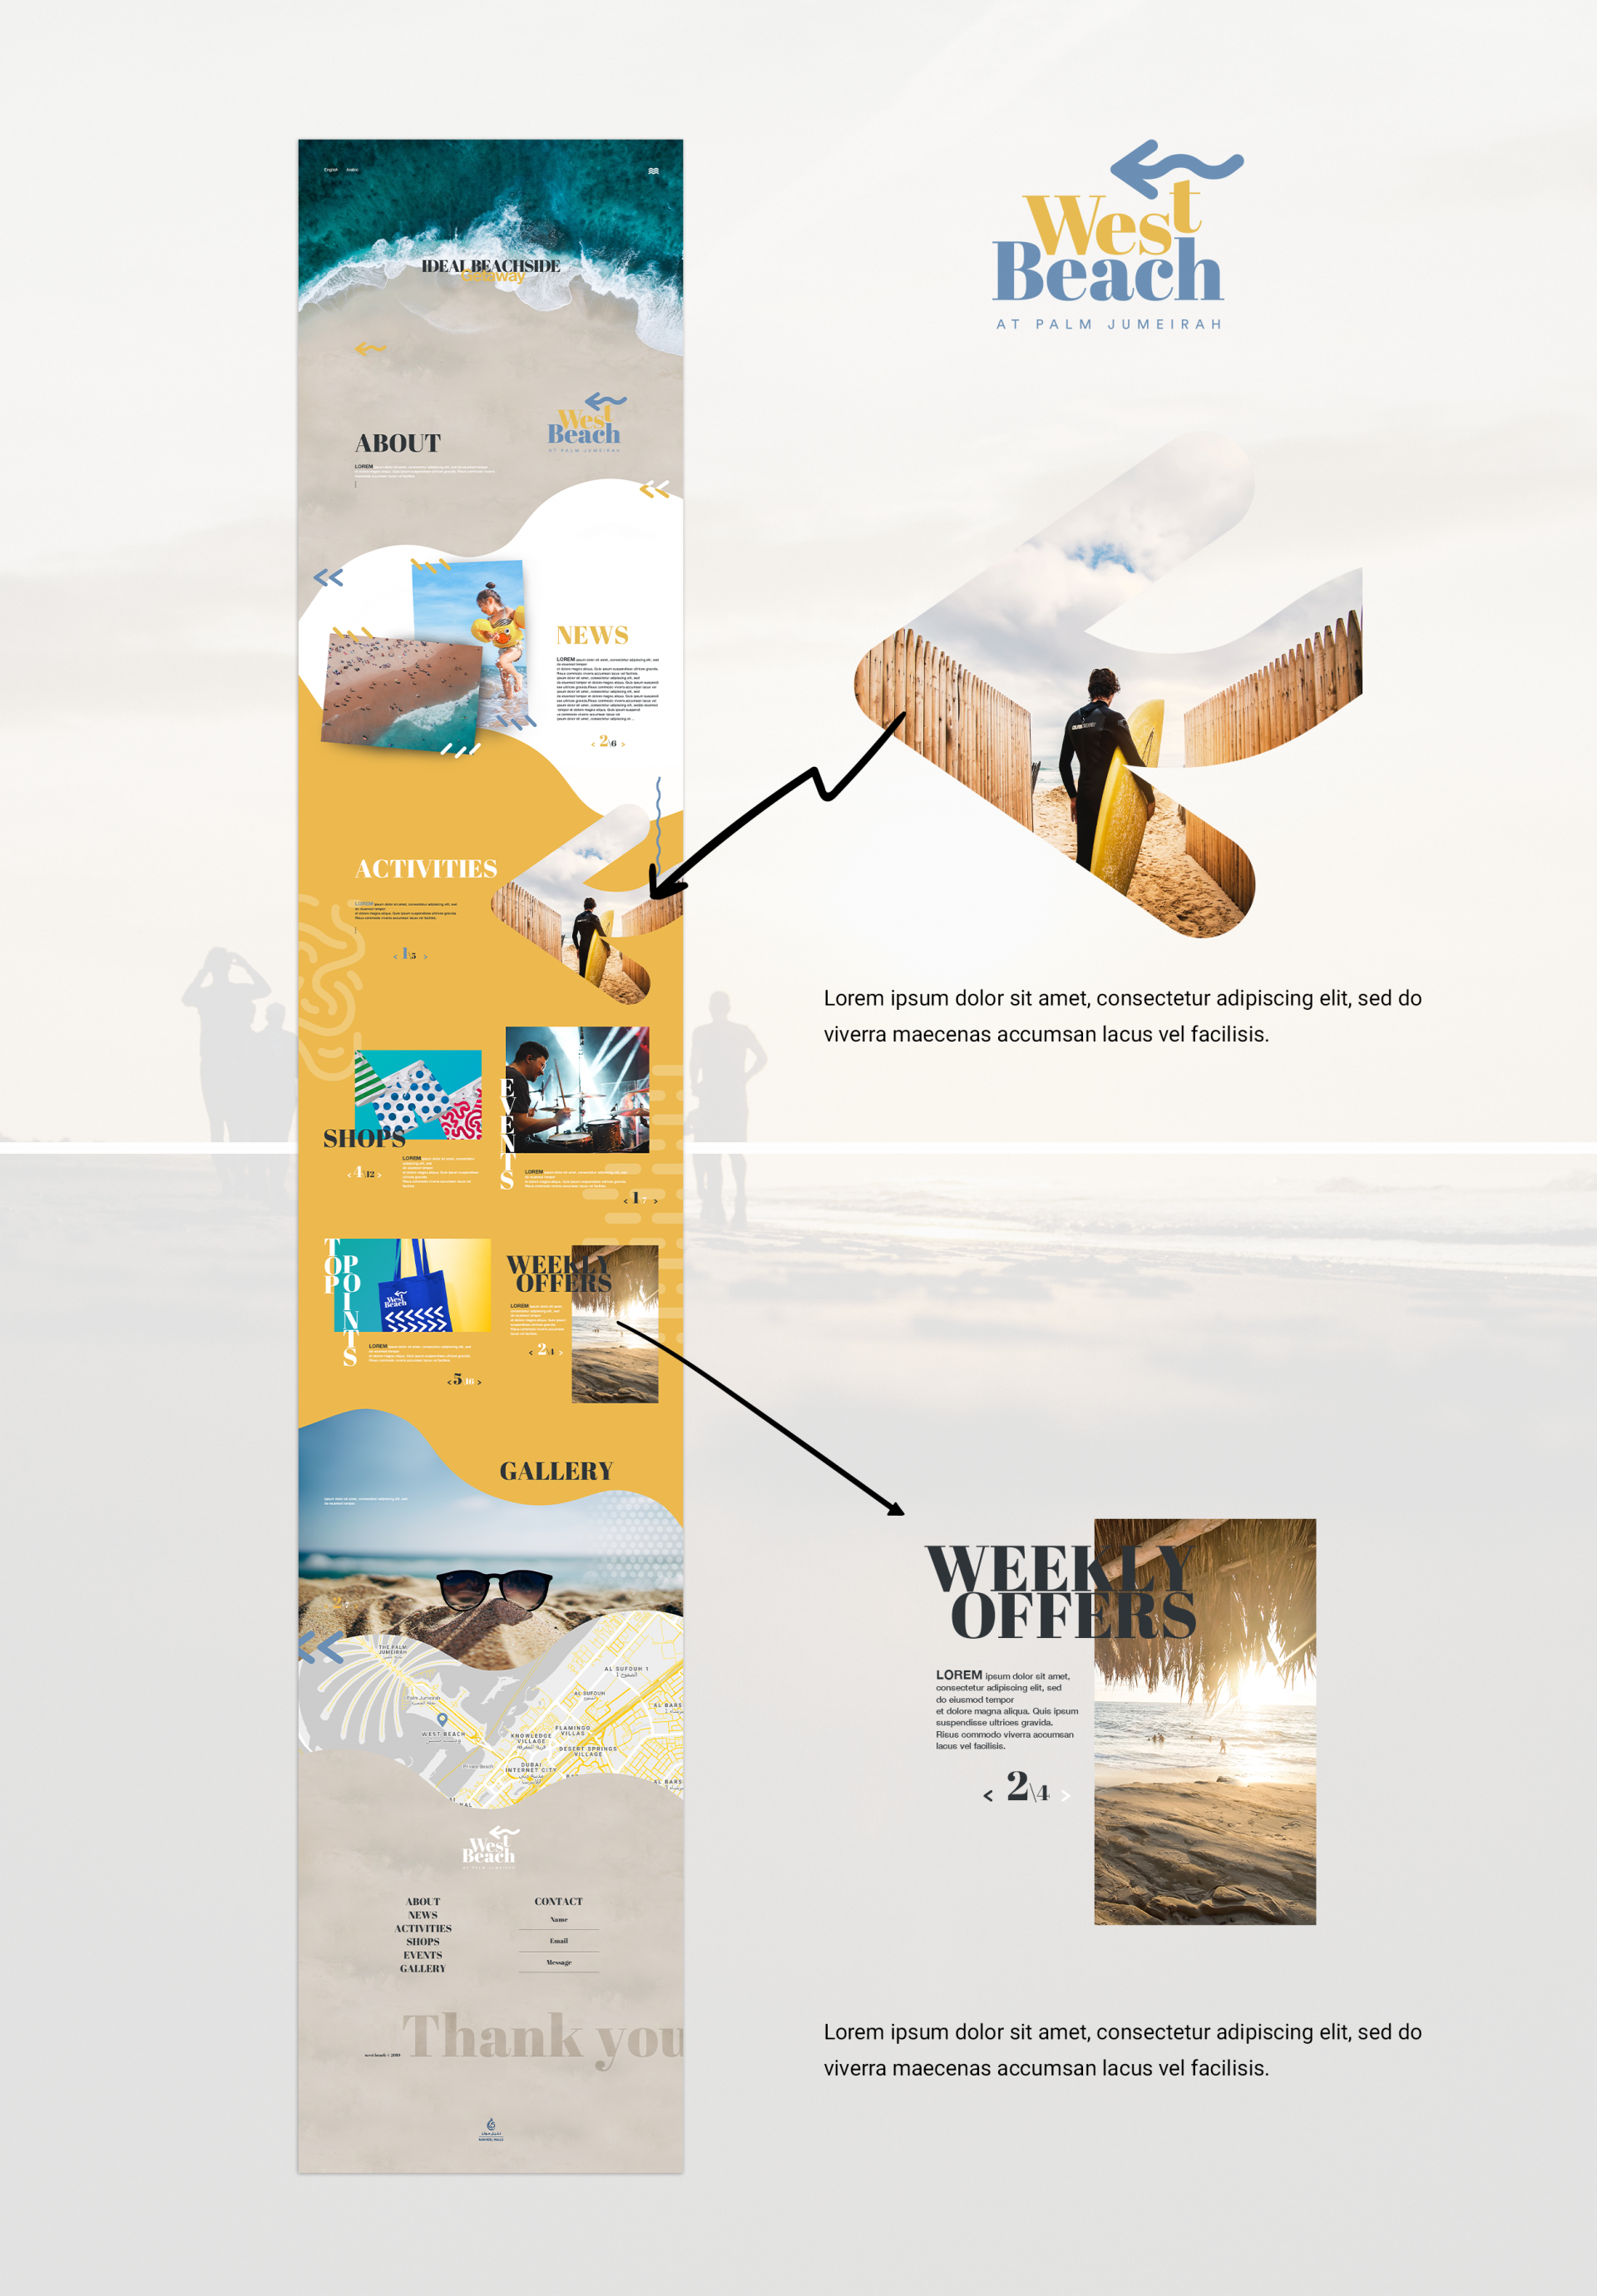 Client West Beach - Worked for Digital Marketing